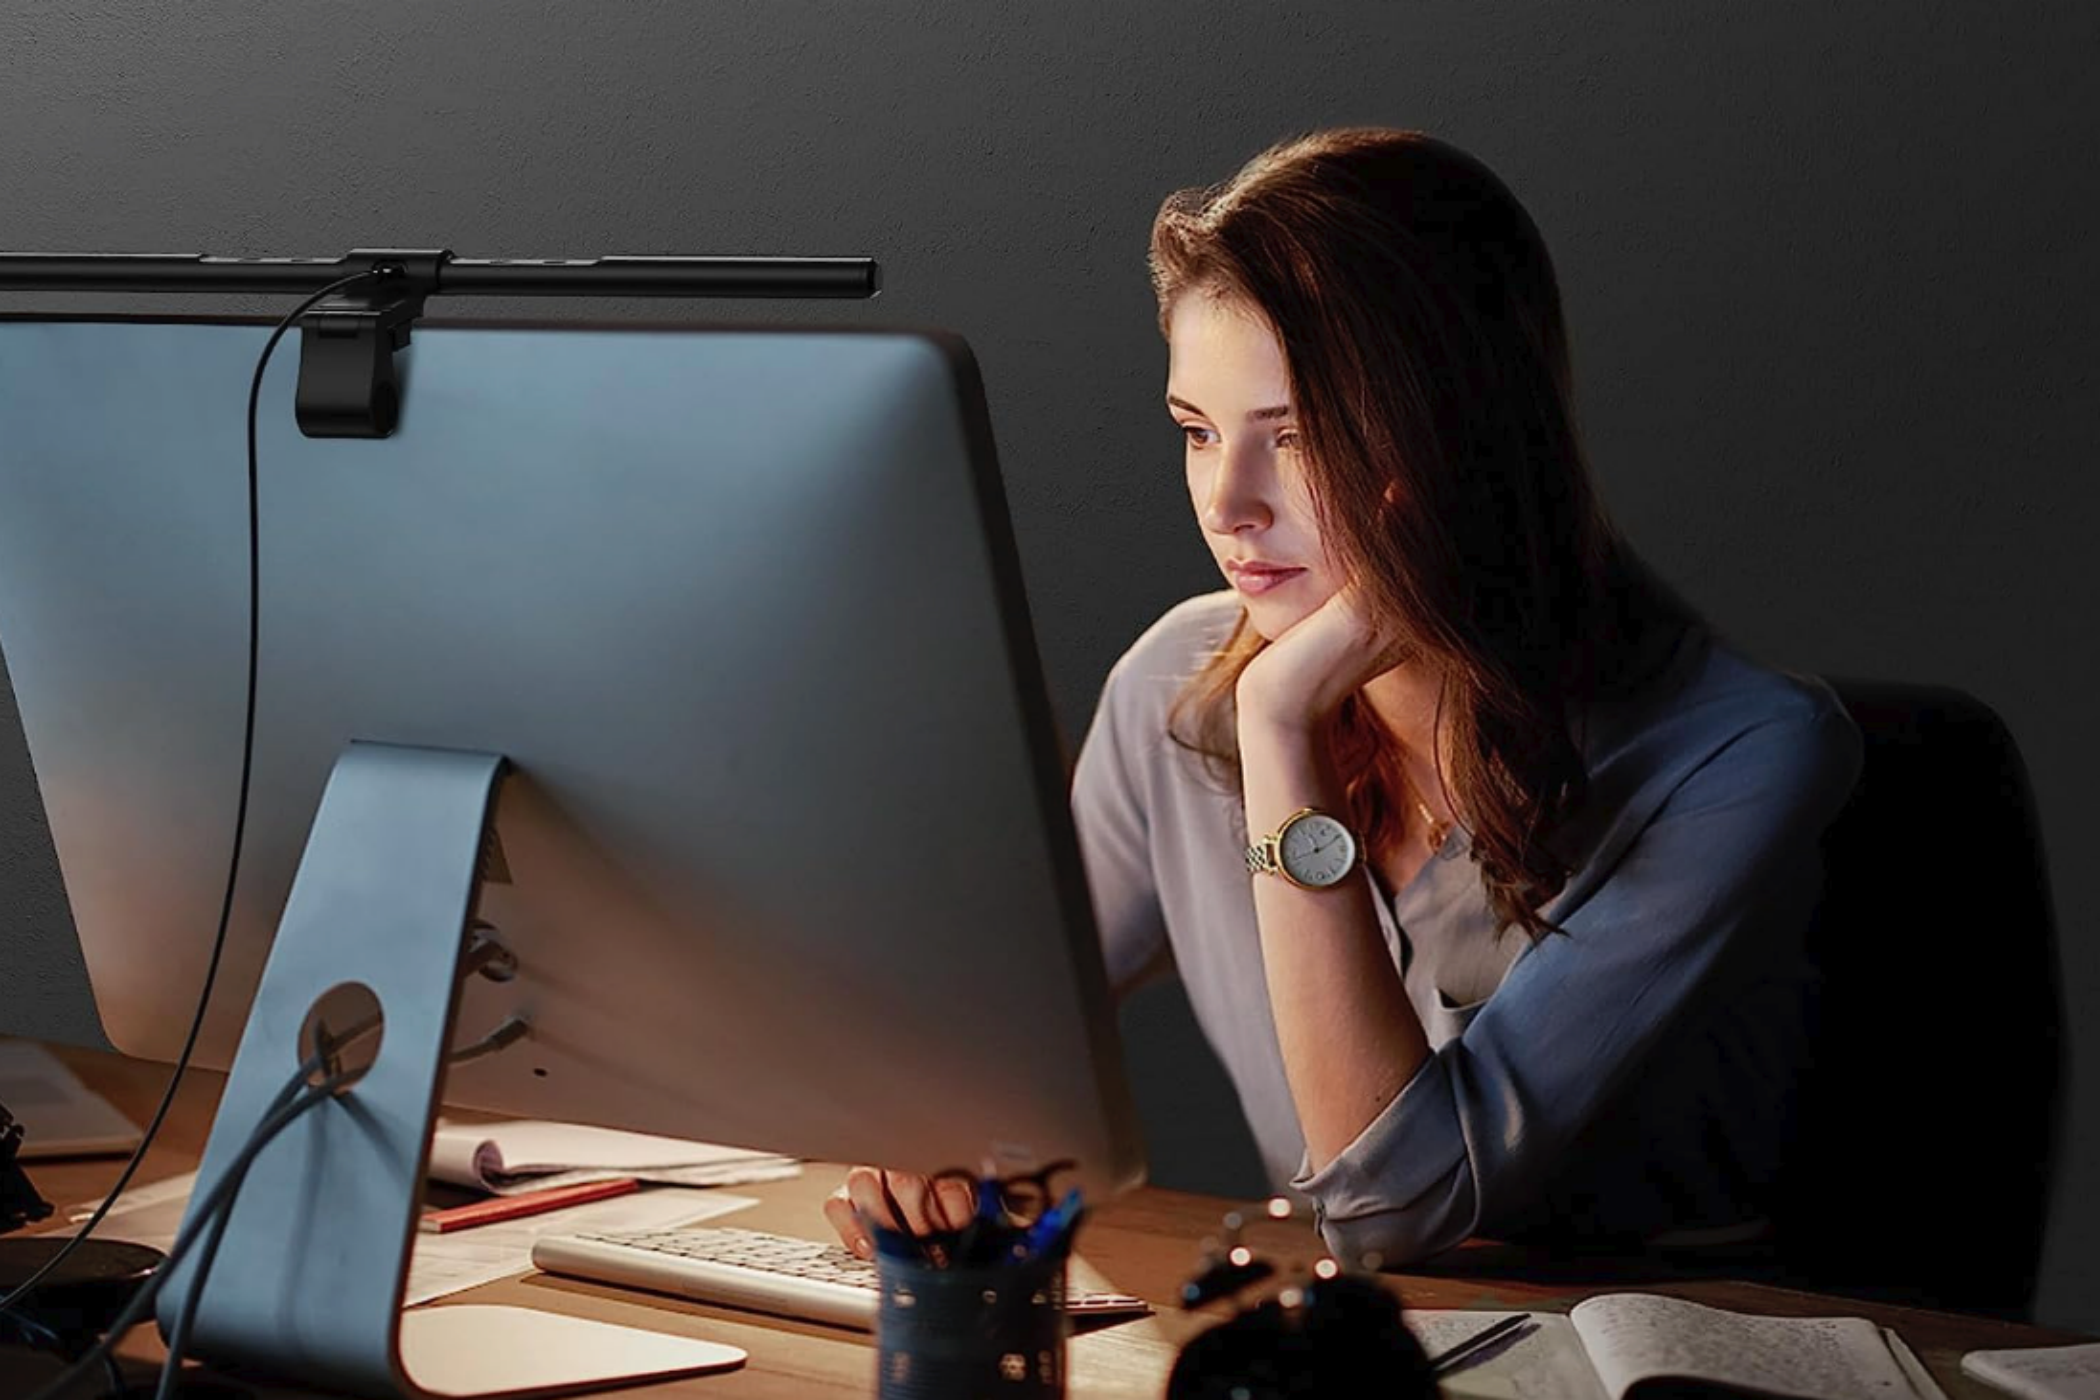 A woman using a monitor with a Quntis ScreenLinear Pro light bar attached on top.